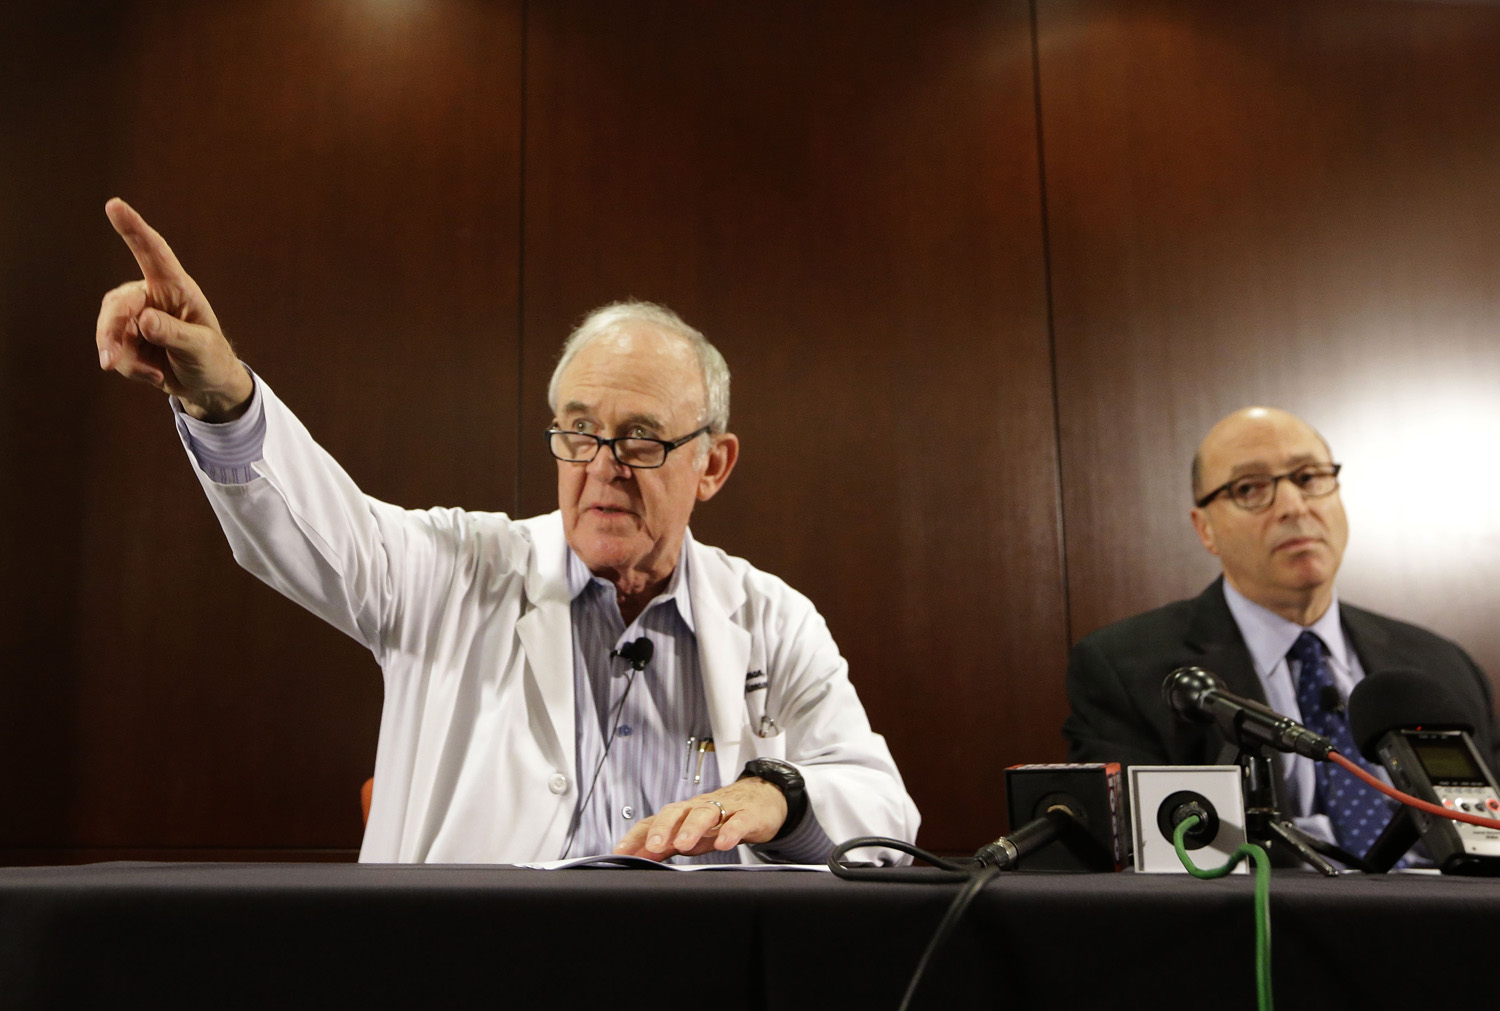 Dr. Edward Goodman, left, epidemiologist at Texas Health Presbyterian Hospital Dallas, points to a reporter for a question as Dr. Mark Lester looks on during a news conference about an Ebola infected patient they are caring for in Dallas, Sept. 30, 2014.